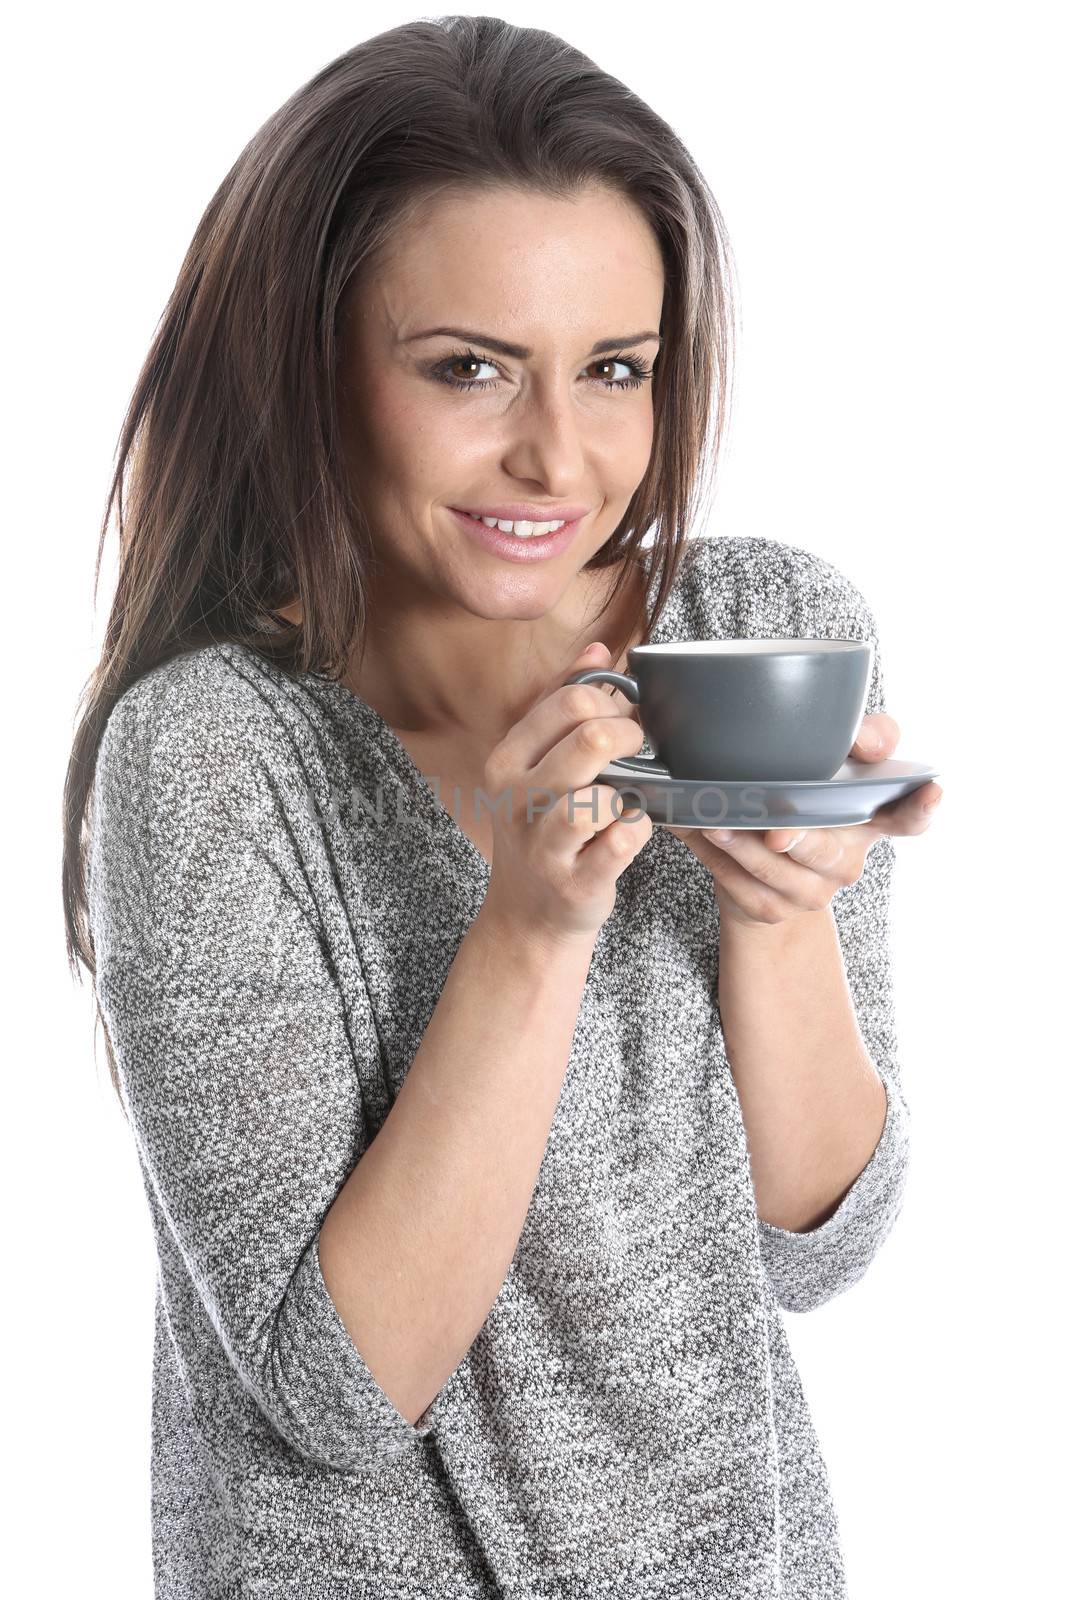 Model Released. Woman Drinking a Cup of Coffee by Whiteboxmedia